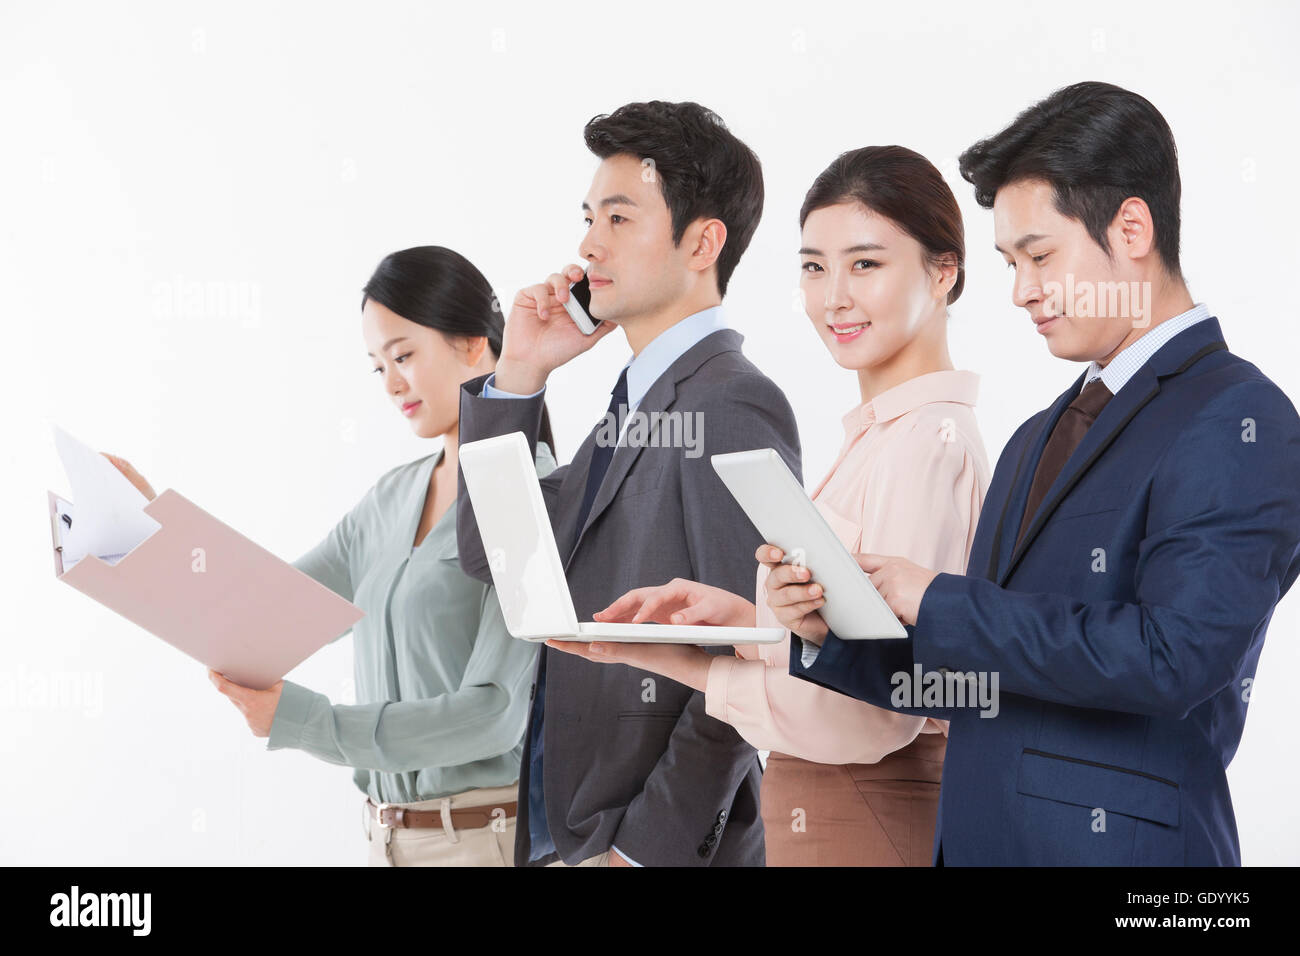 Business woman with a notebook computer smiling at front and three business people with file, cellphone and tablet looking down Stock Photo